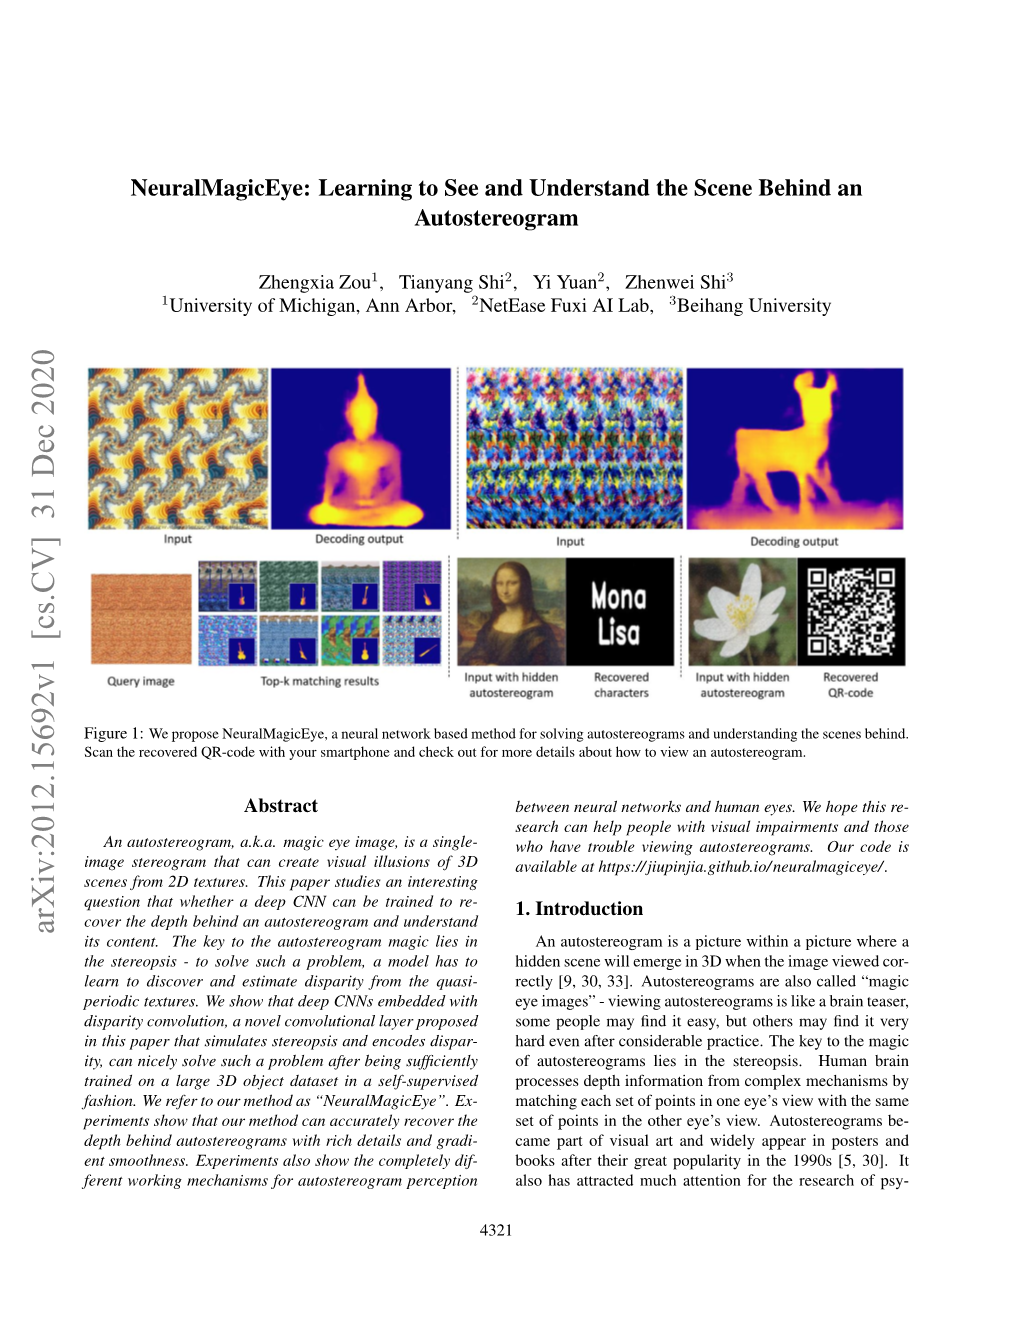 Neuralmagiceye: Learning to See and Understand the Scene Behind an Autostereogram